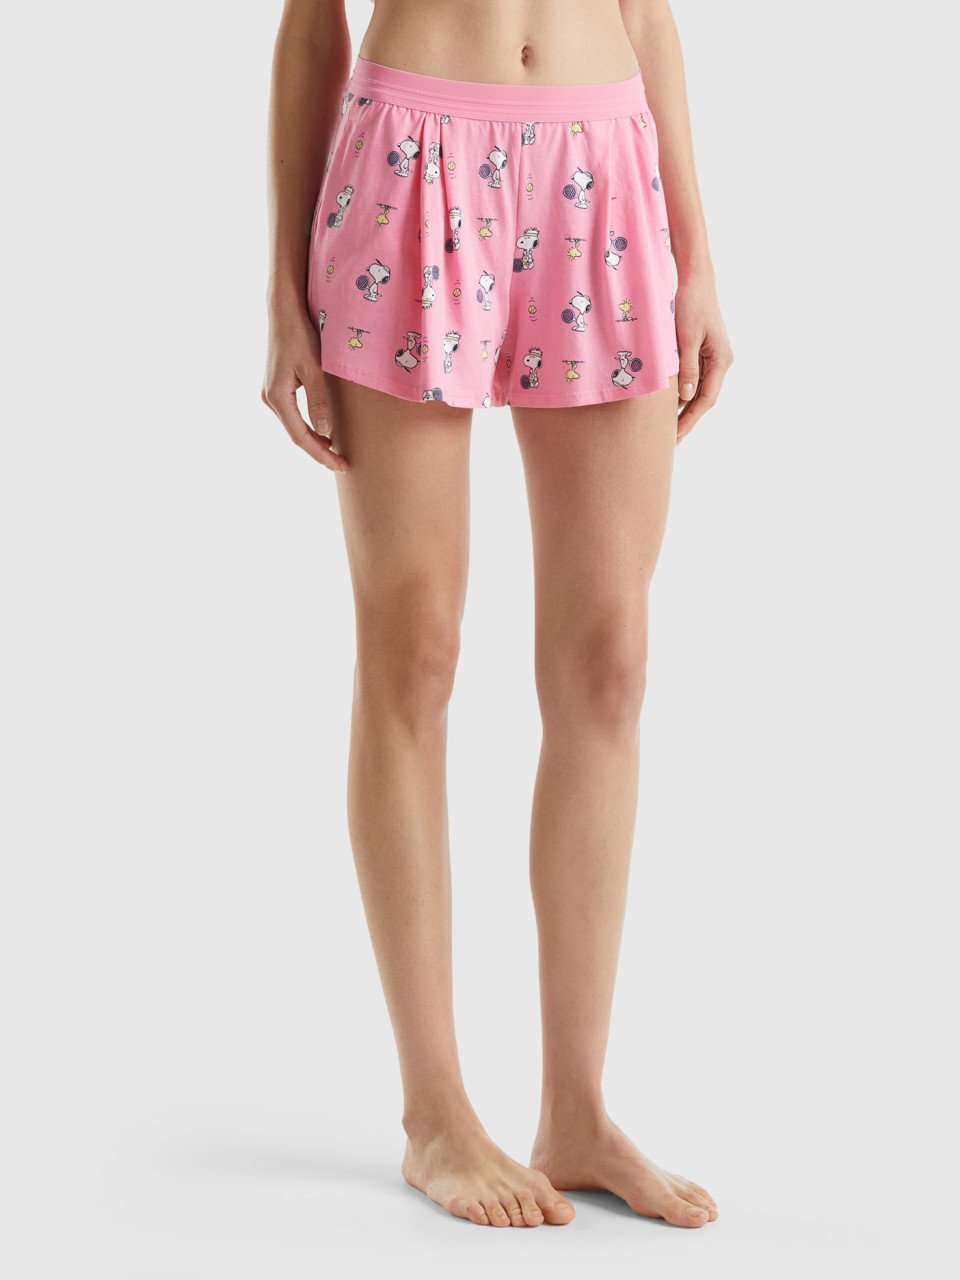 Benetton, Shorts Snoopy ©peanuts, Pink, female